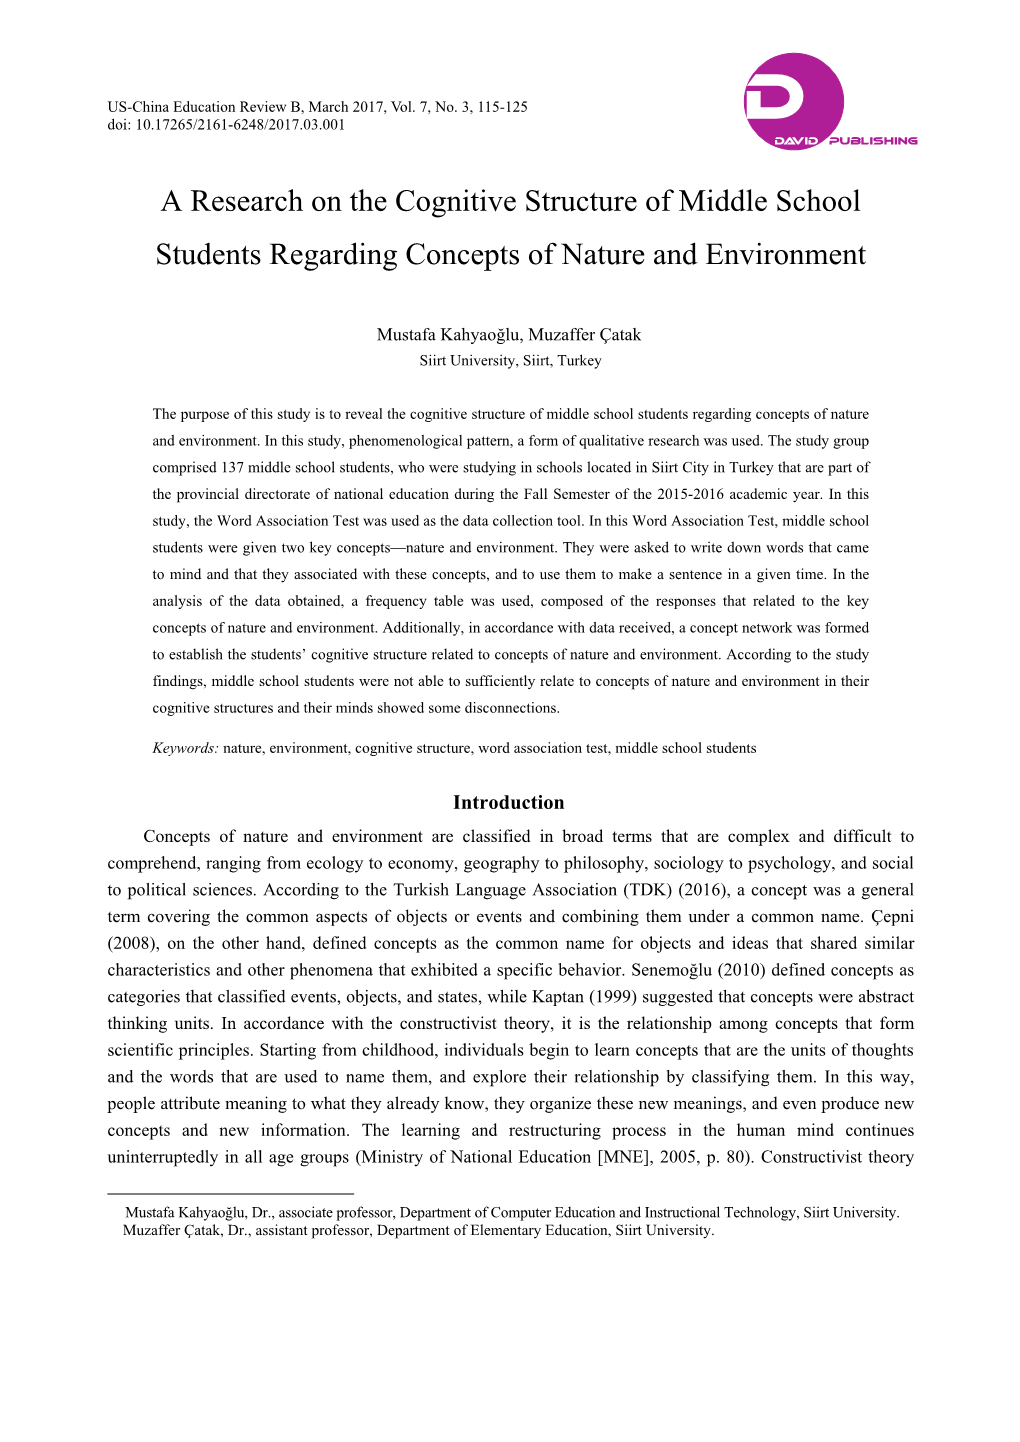 A Research on the Cognitive Structure of Middle School Students Regarding Concepts of Nature and Environment